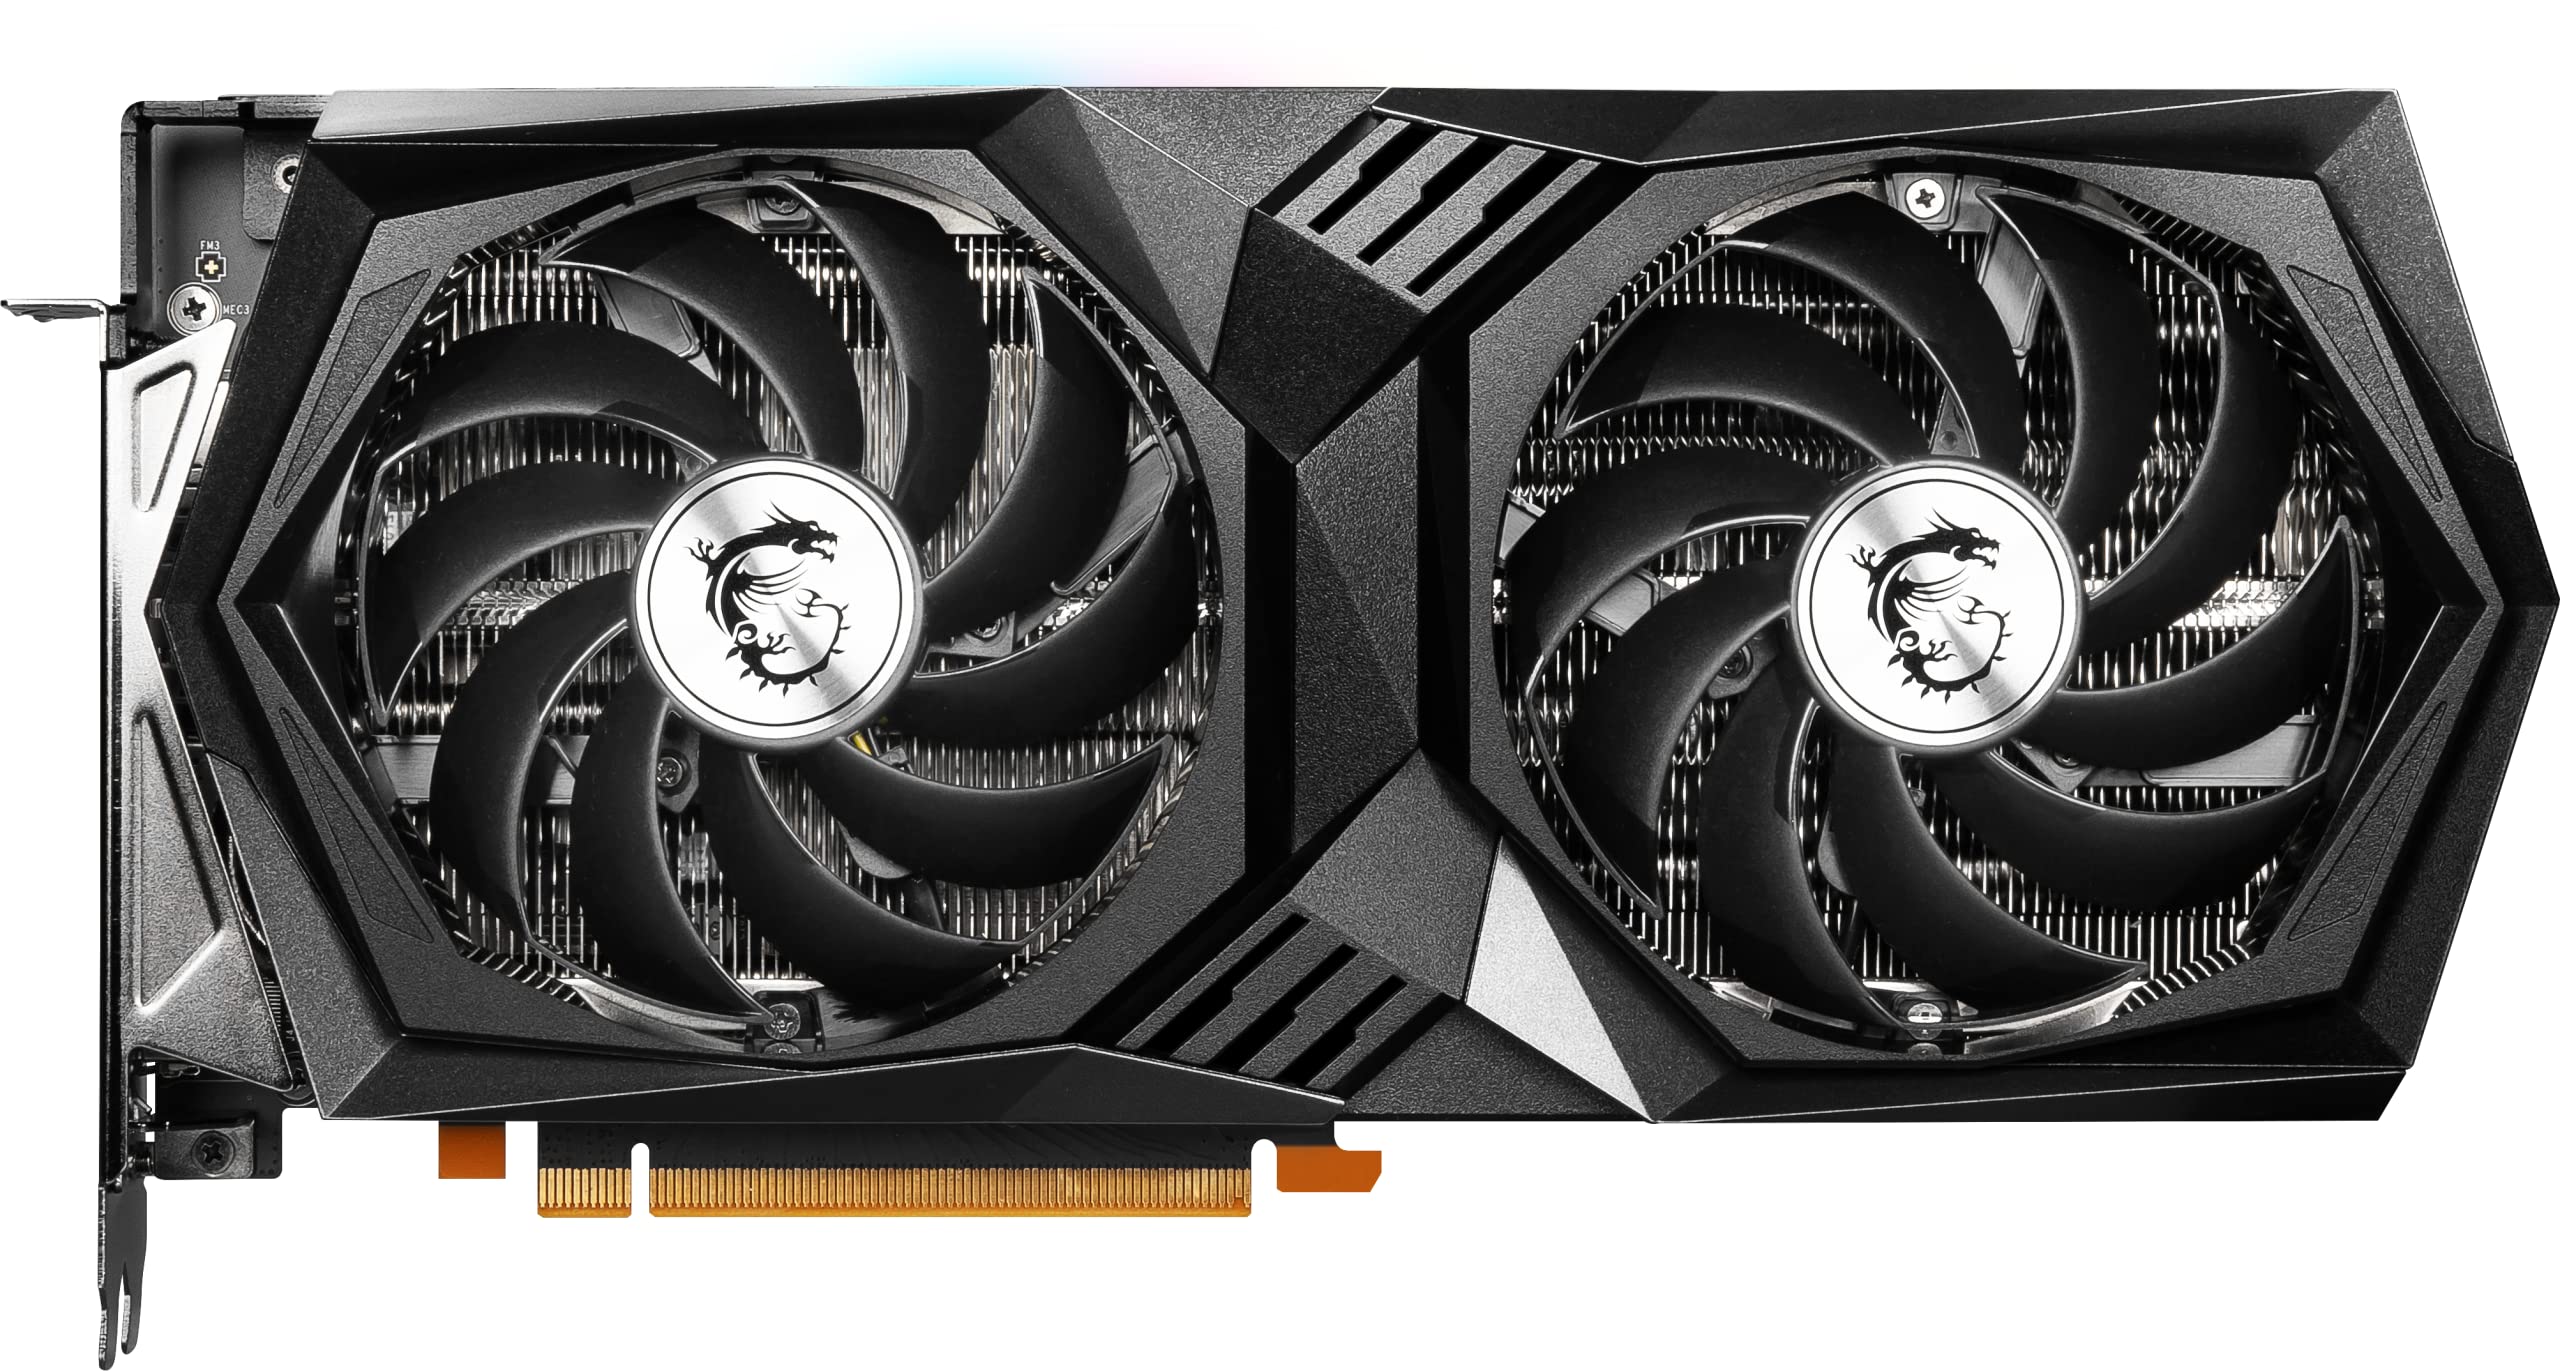 MSI GeForce RTX 3050 GAMING X 8G Gaming Graphics Card - 8GB GDDR6X, 1845 MHz, PCI Express Gen 4 x 8, 128-bit, 3x DP v 1.4a, HDMI 2.1 (Supports 4K)